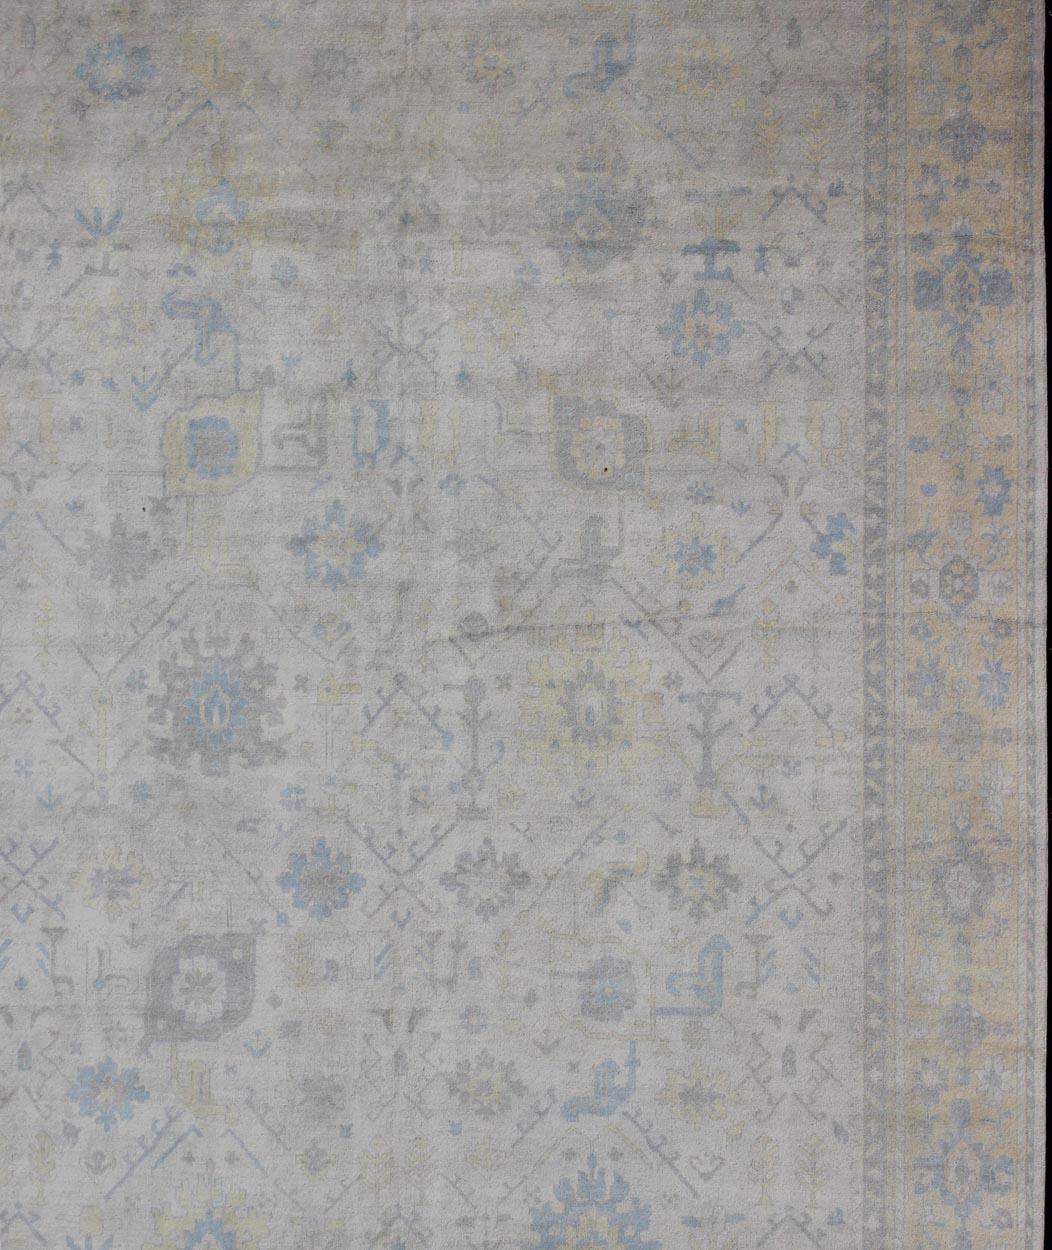 Oushak design rug in gray, silver, light blue and charcoal with all-over geometric design, rug OB-9356761, country of origin / type: India/ Oushak

This hand knotted Oushak rug features a beautiful all-over design rendered in grays, L. blues,